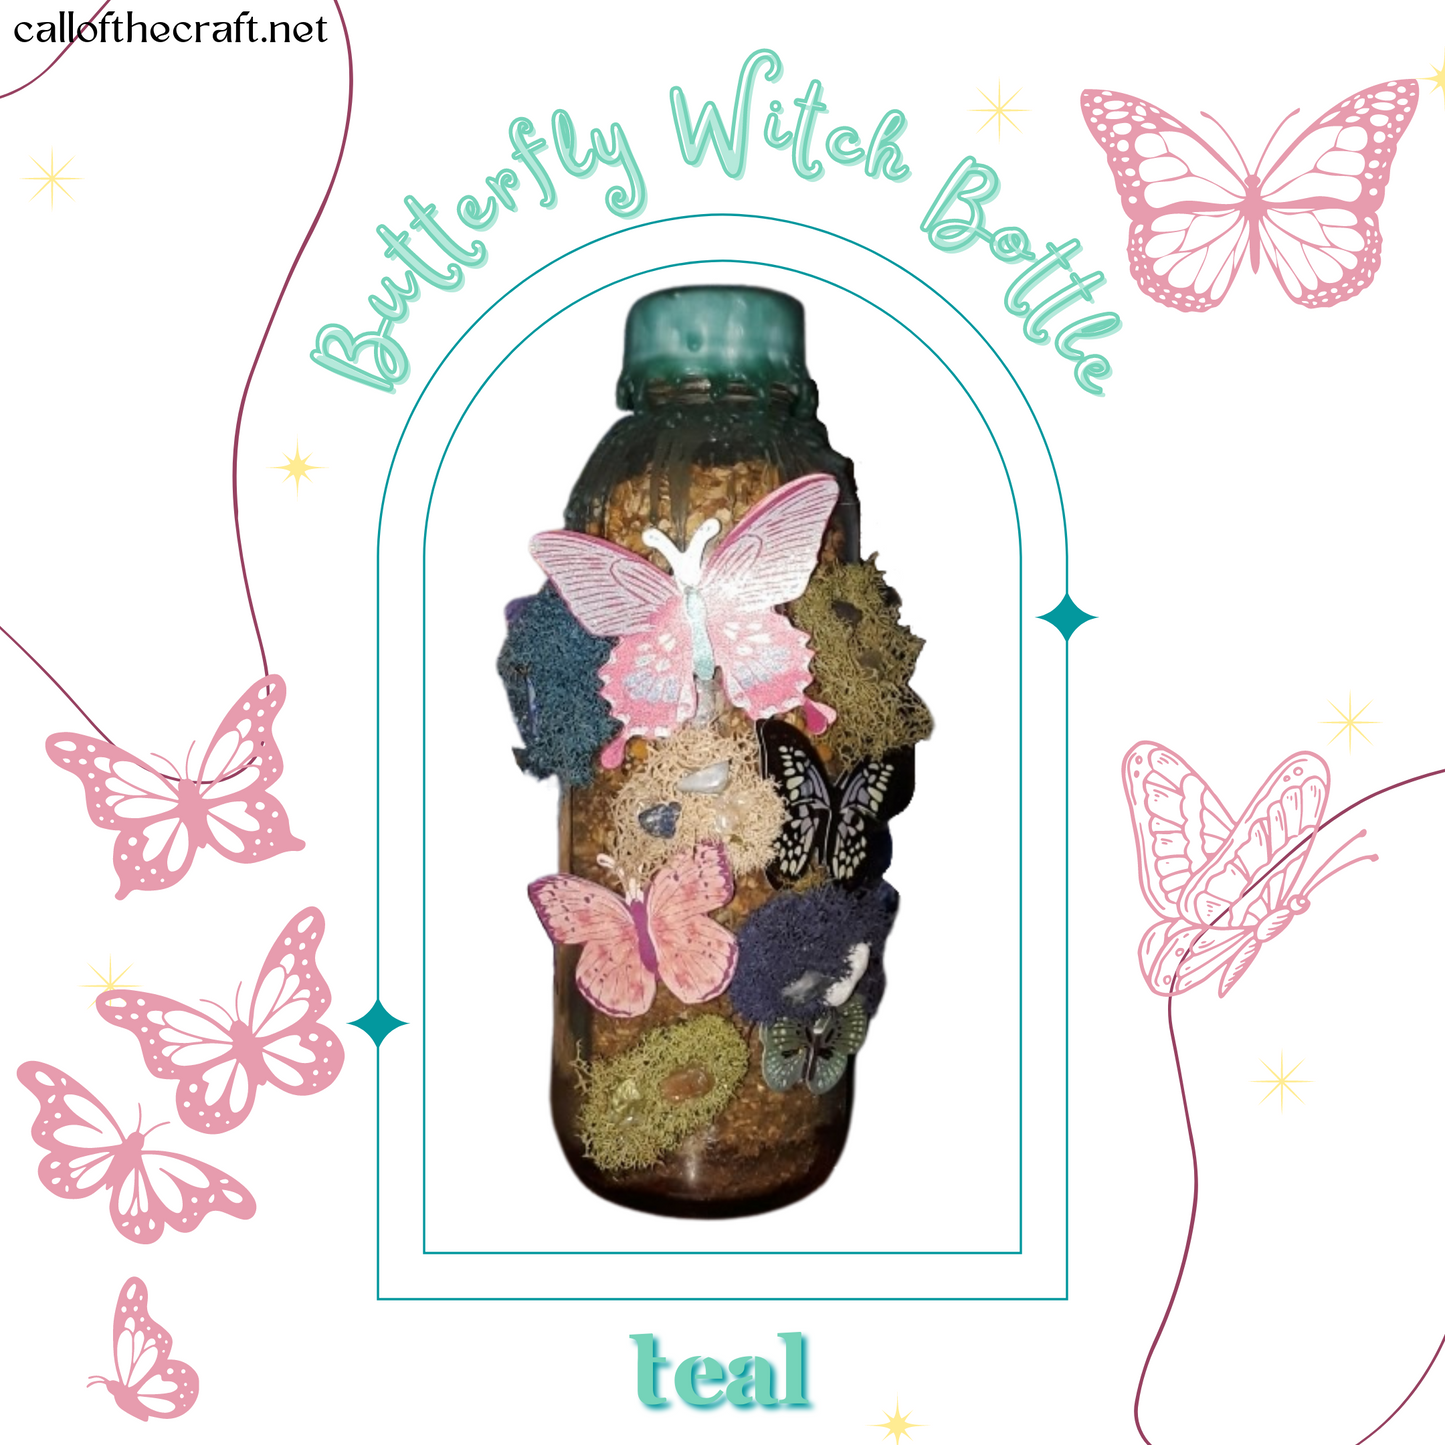 Butterfly Witch Bottles, Teal - The Call of the Craft